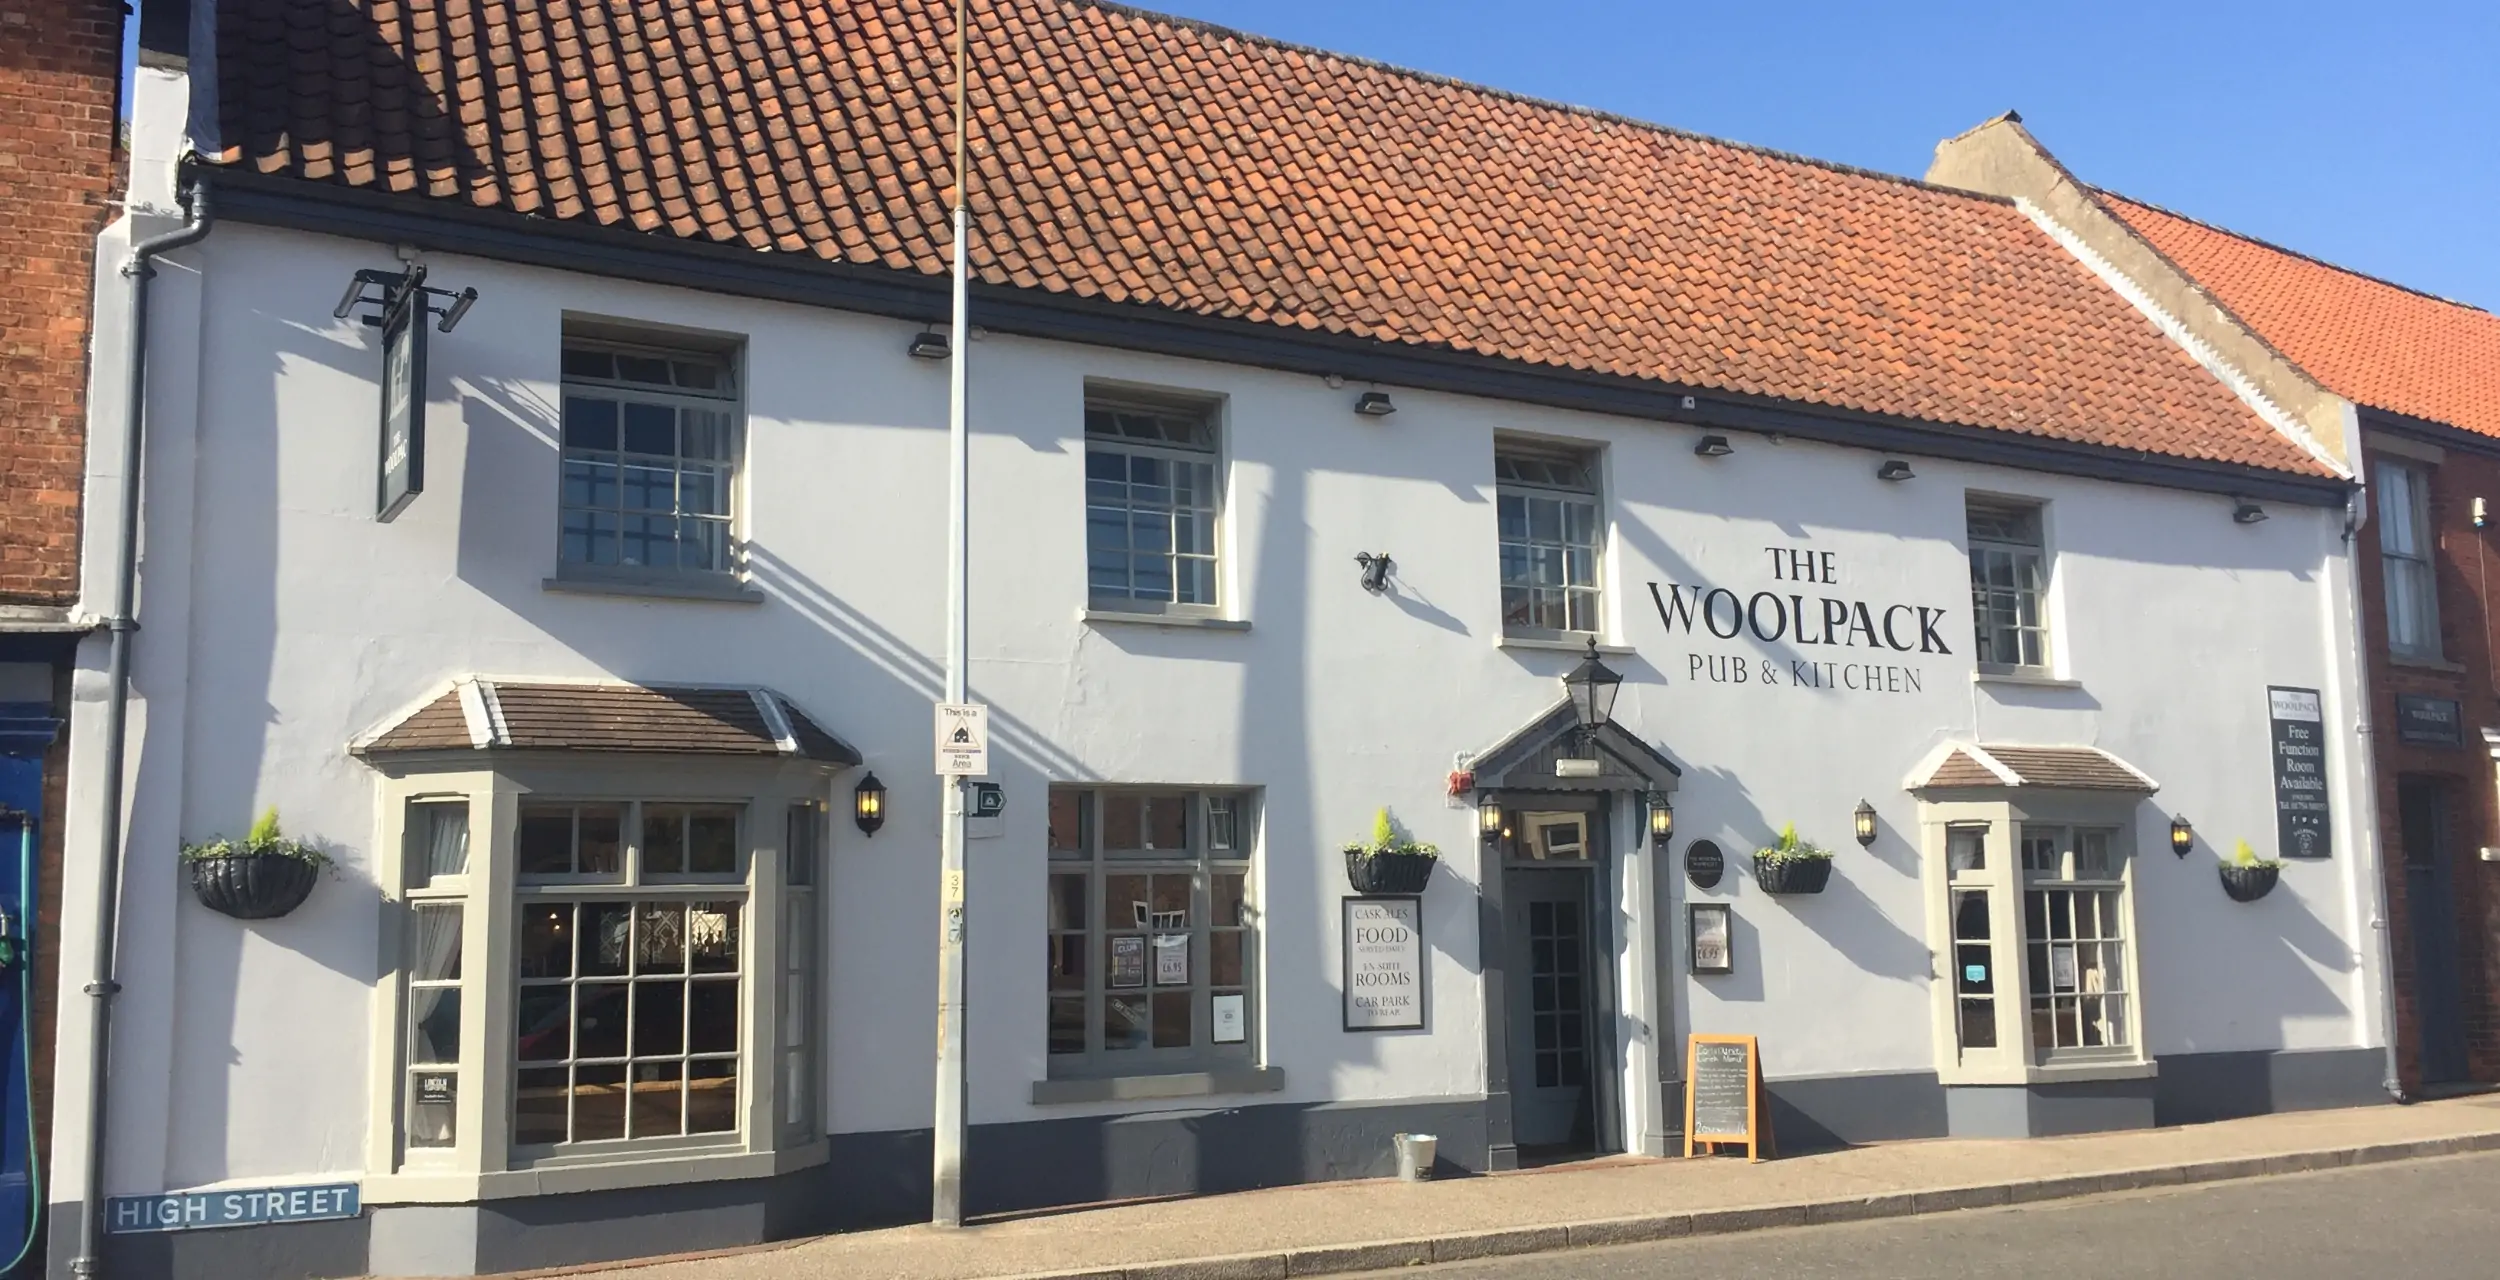 A warm welcome to new Woolpack landlords